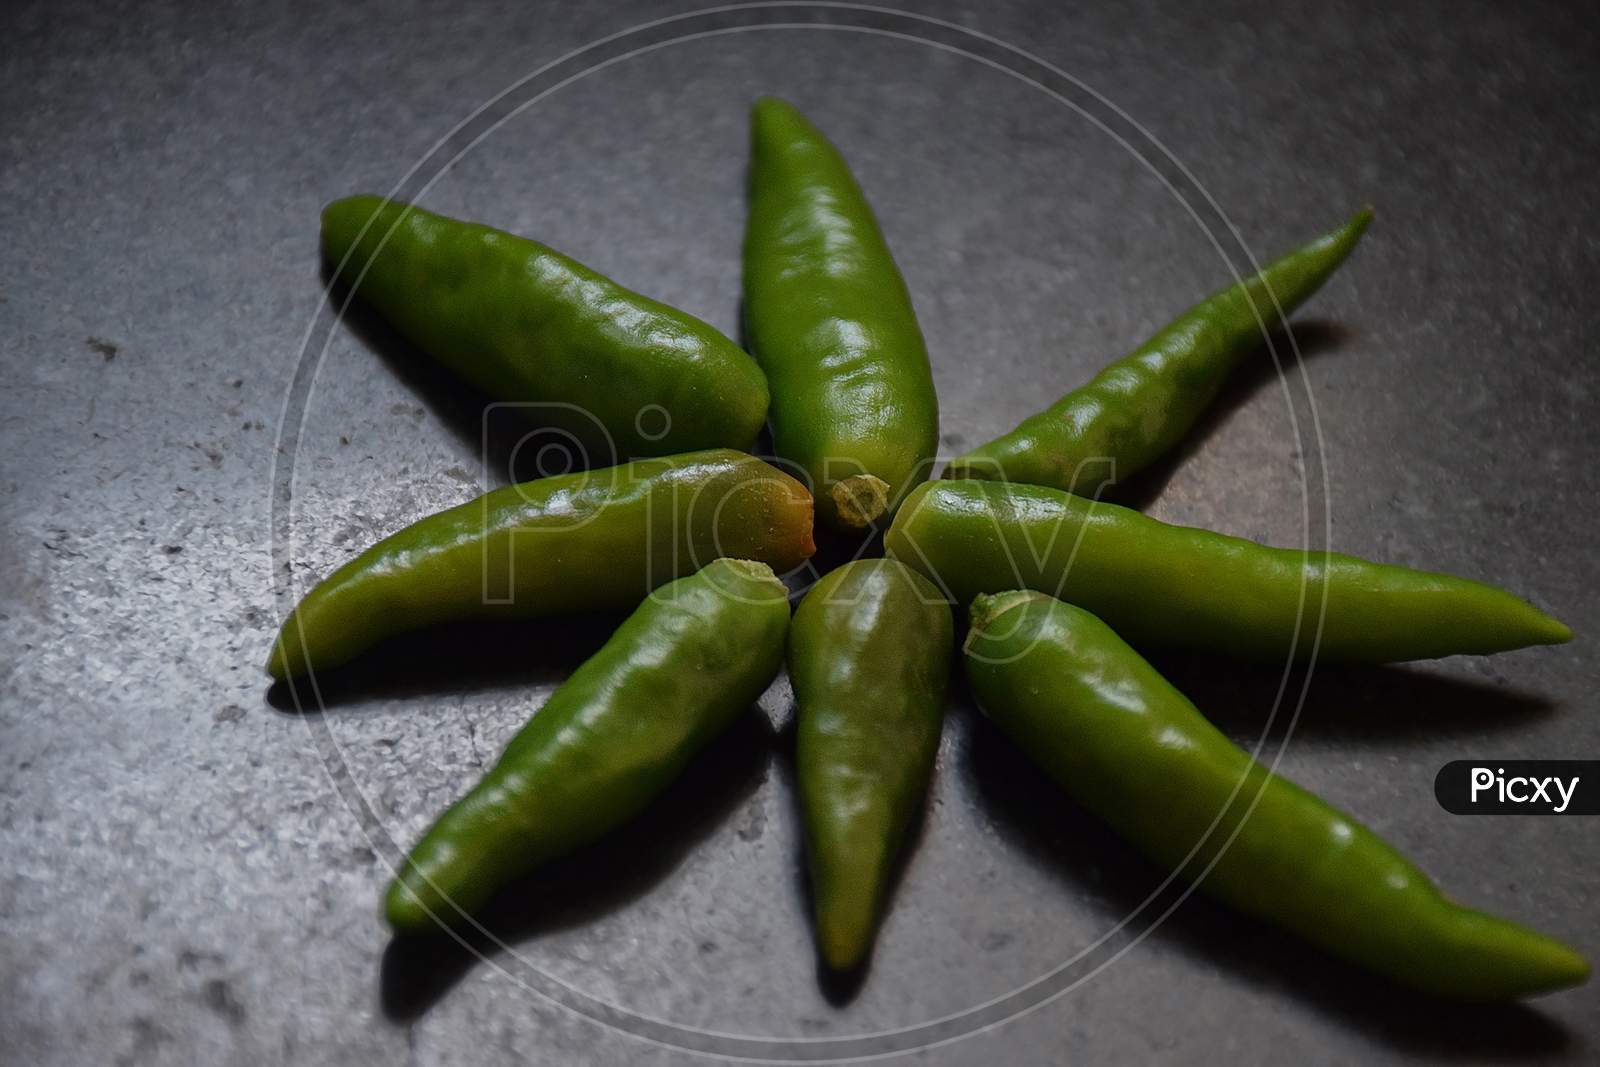 Picture Of Indian Hot And Spicy Green Chilli Decor With Star Shape